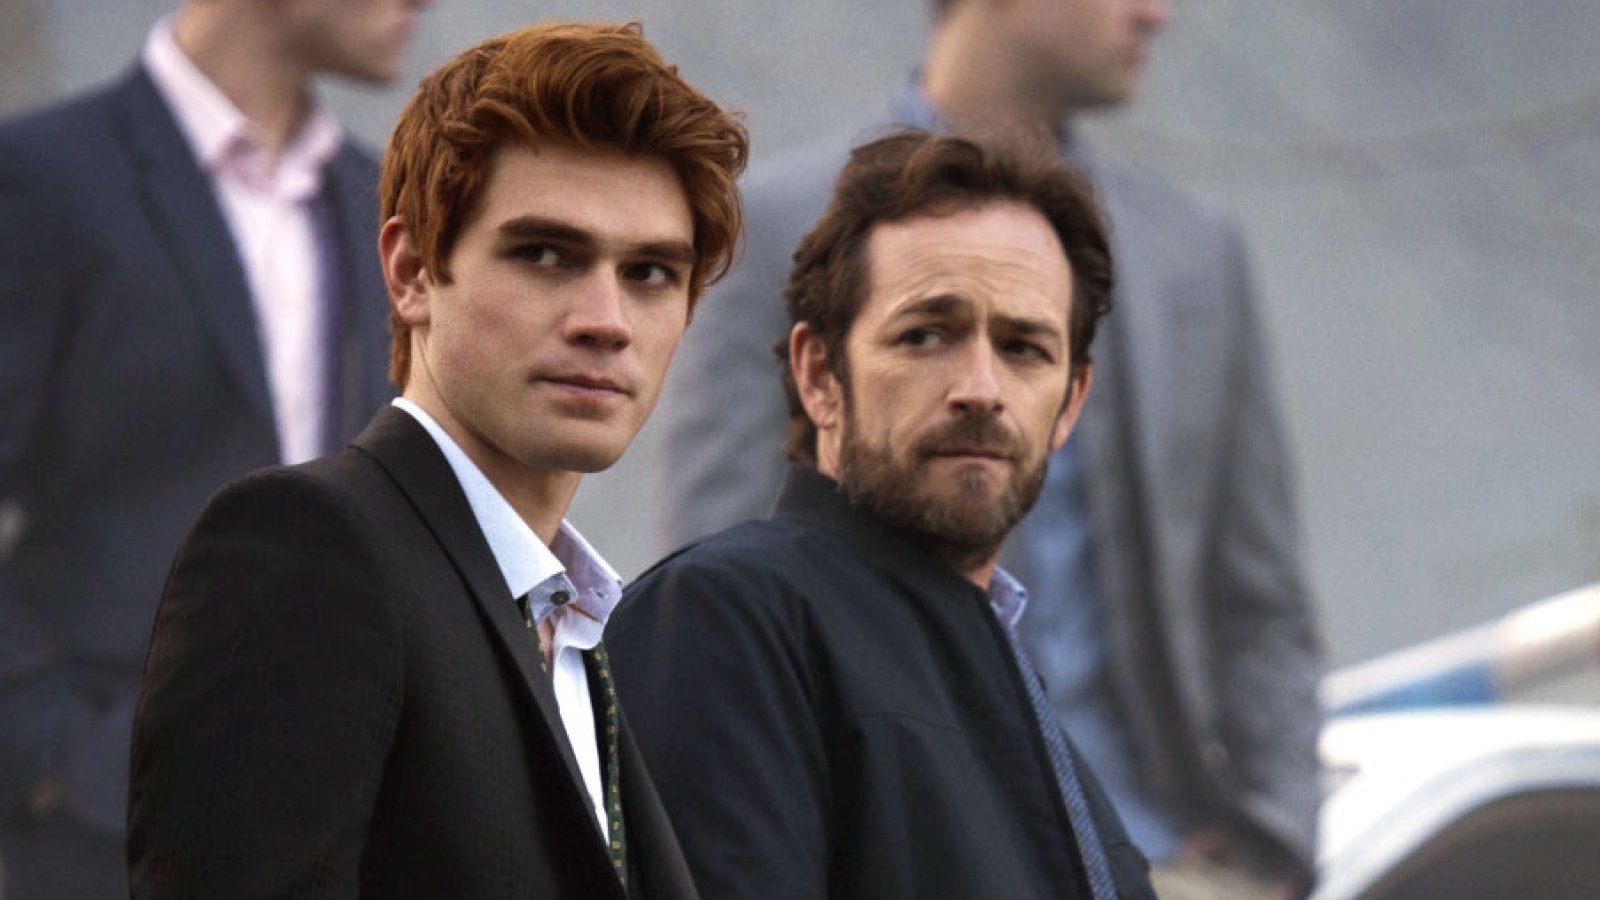 New ‘Riverdale’ Trailer Shows Moment When Archie Learns His Dad — Played By Luke Perry —Is Dead